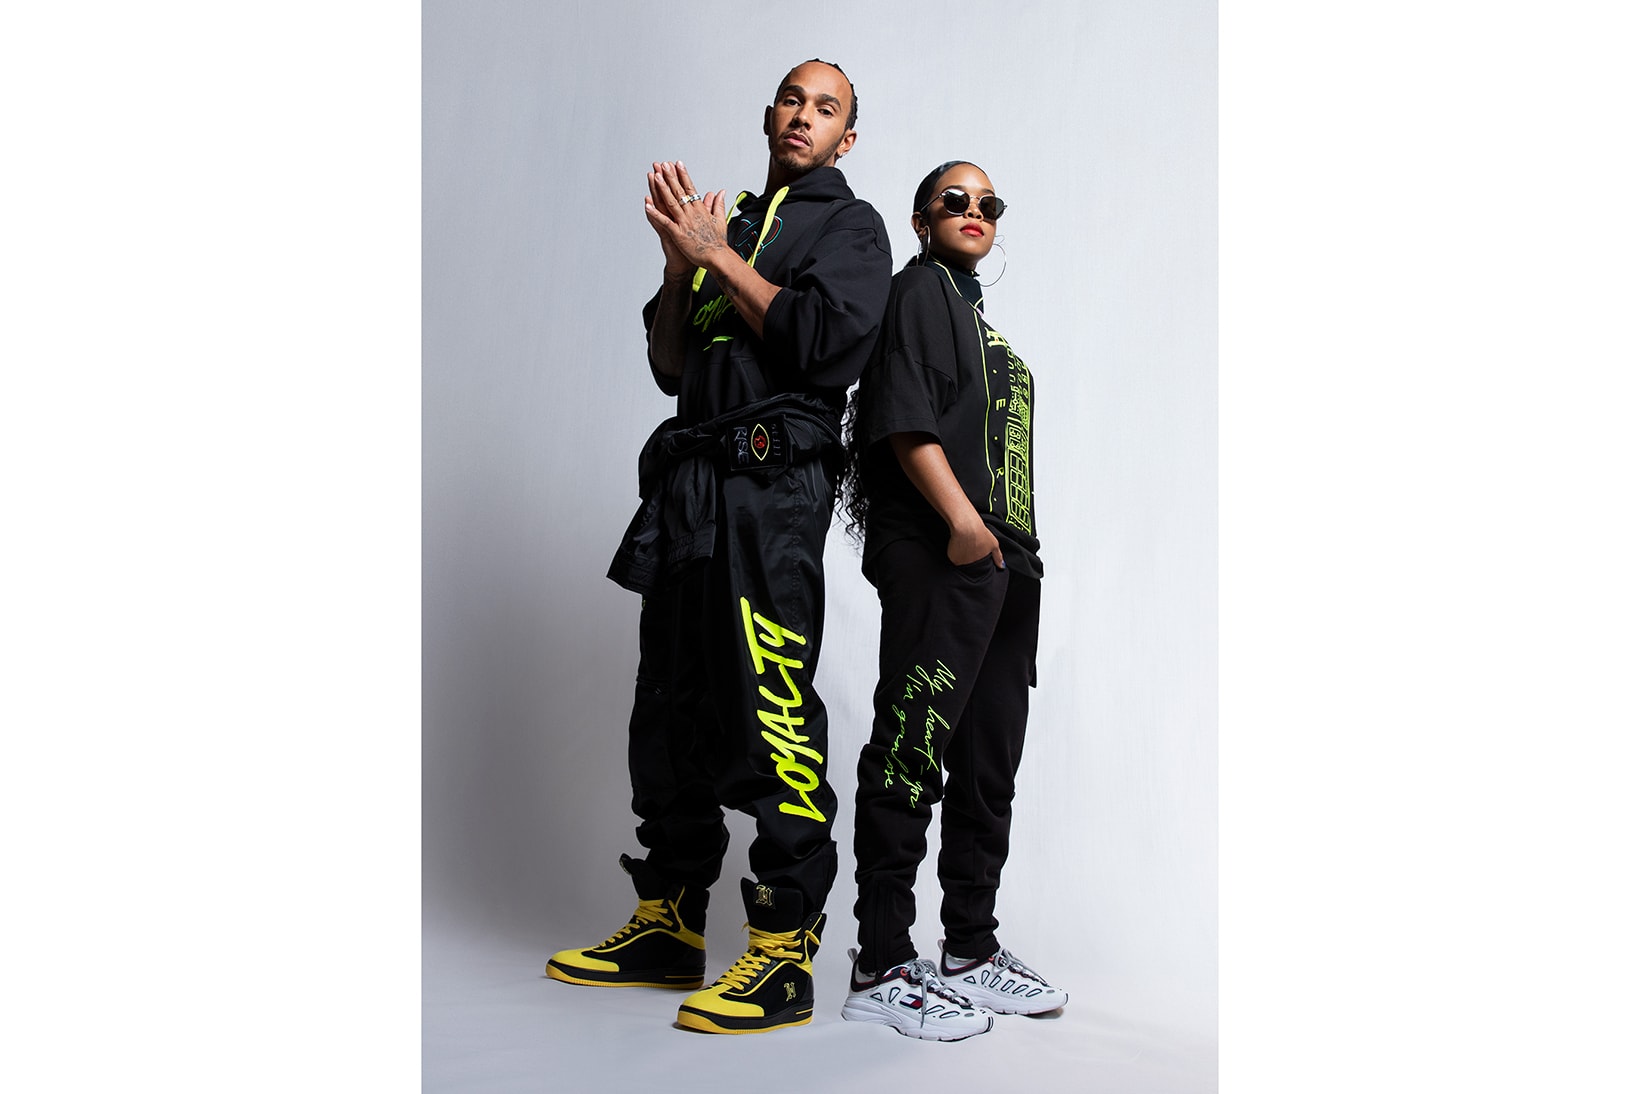 tommy hilfiger her lewis hamilton collaboration spring summer hoodies shirts joggers sweatpants sneakers neon green black